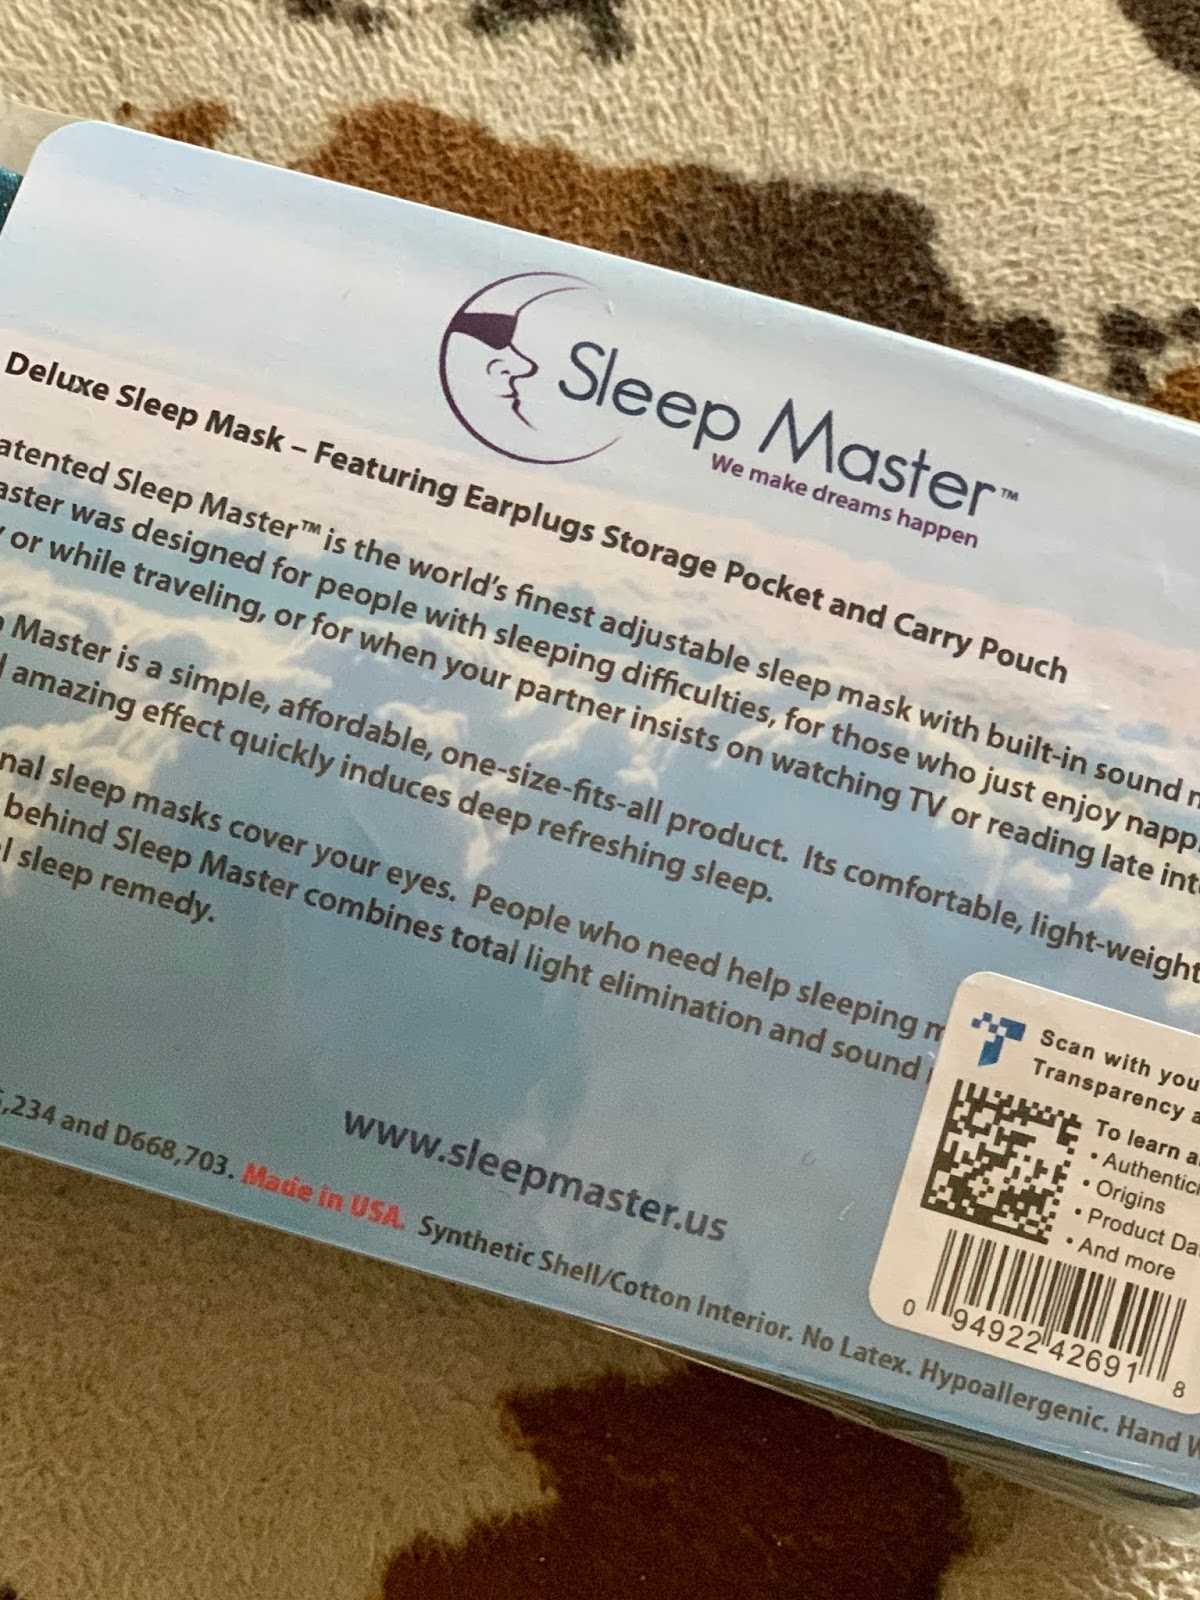 Forord plade forudsigelse Make Dreams Happen with the Sleep Master Deluxe Sleep Mask